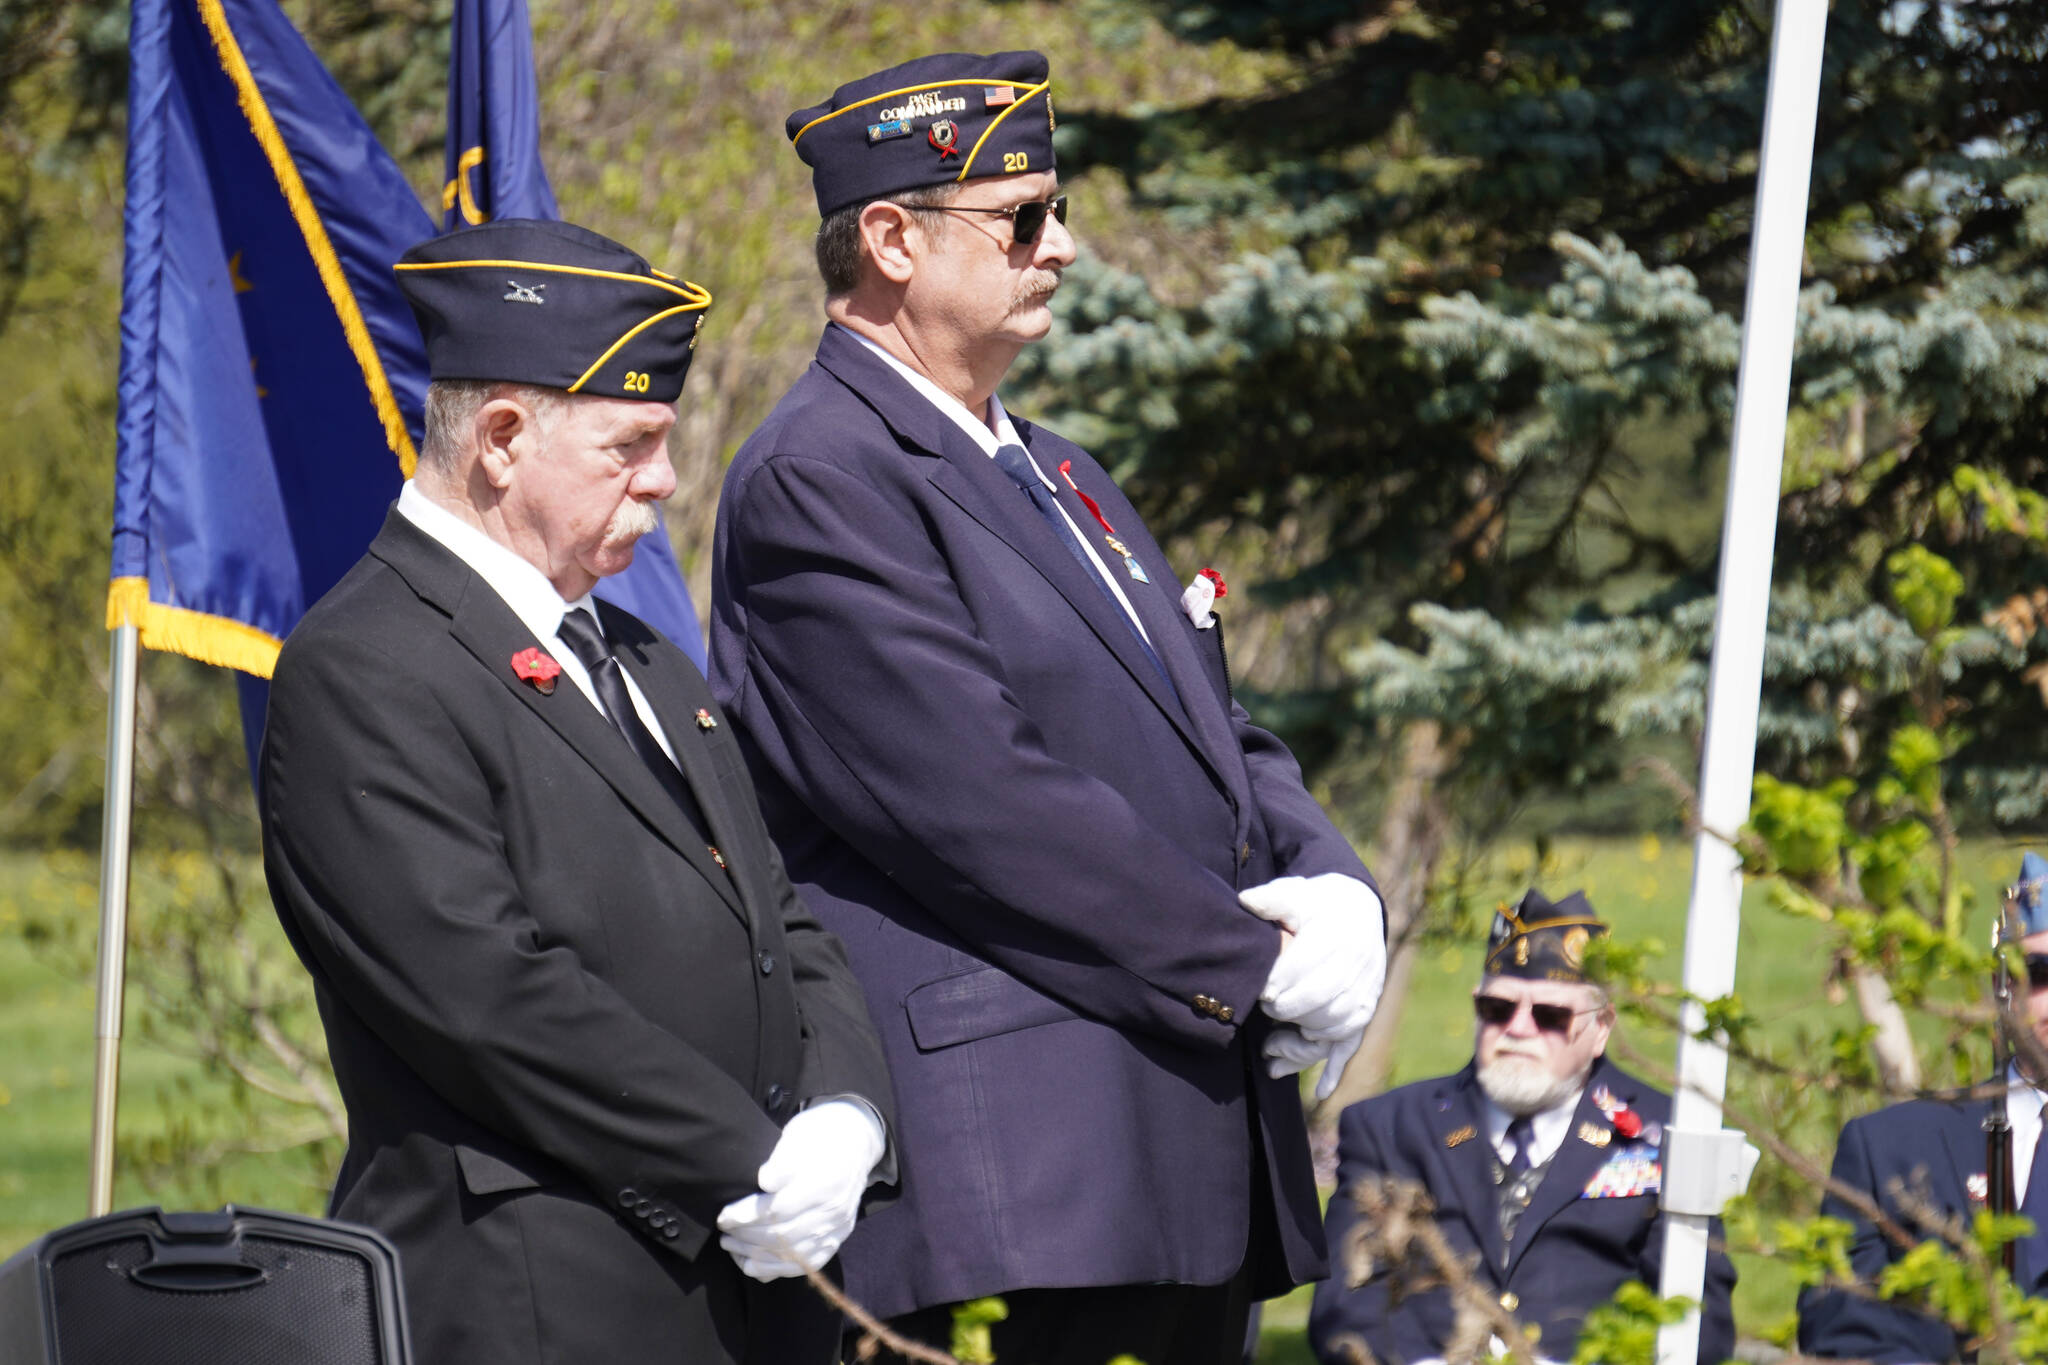 American Legion Post 20 Chaplain Mike Meredith and Past Cmdr. David Segura stand during a Memorial Day ceremony on Monday, May 29, 2023, at Leif Hanson Memorial Park in Kenai, Alaska. (Jake Dye/Peninsula Clarion)